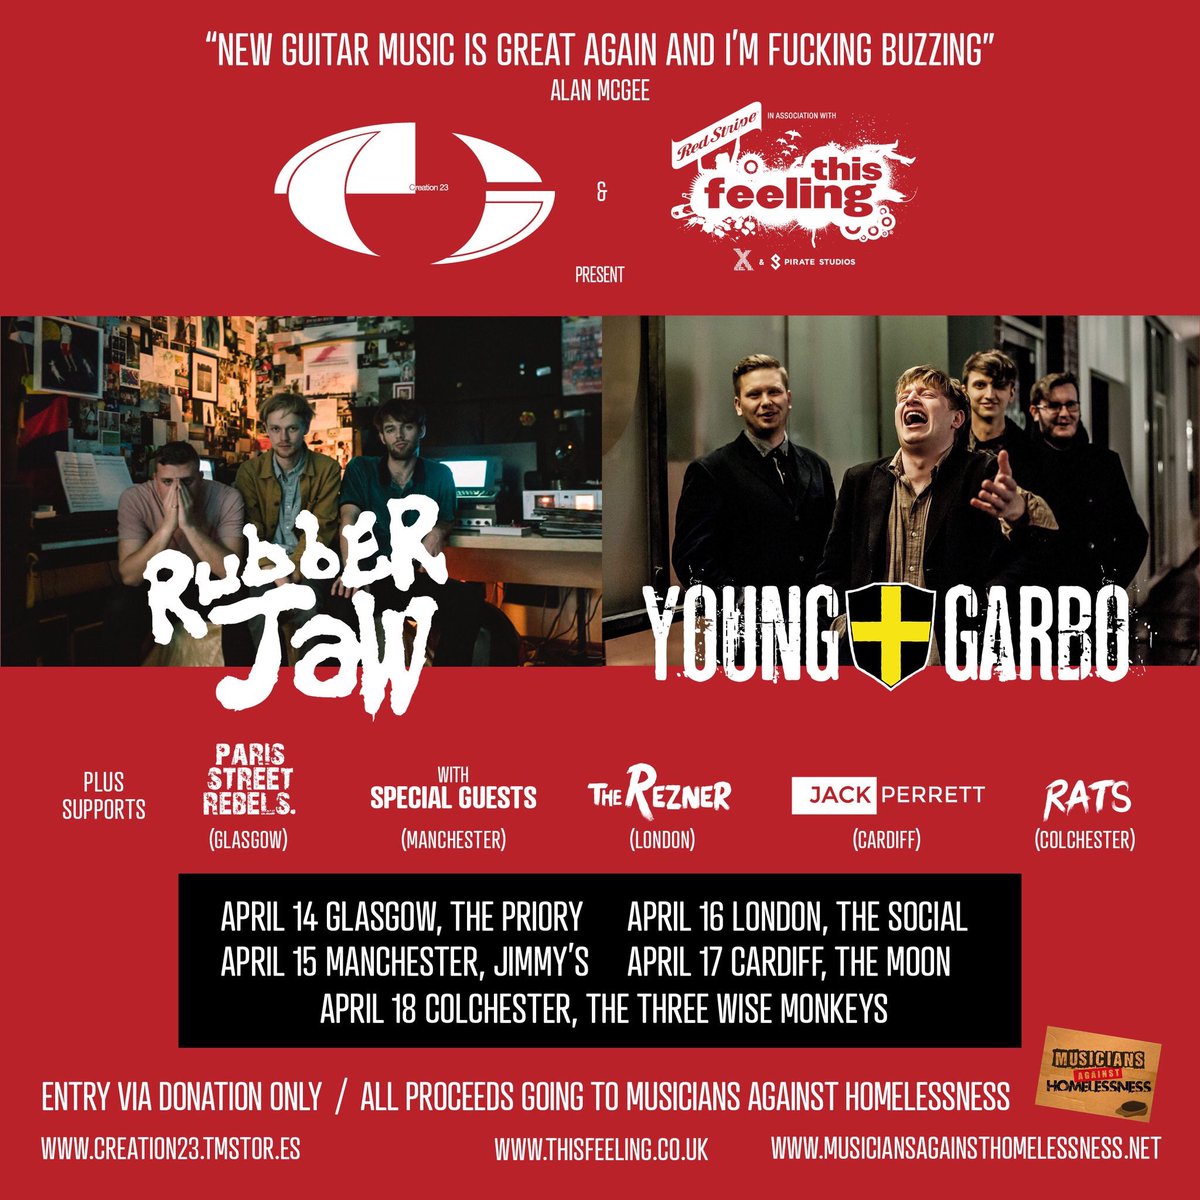 Kicking off this Sunday @This_Feeling & Creation23 tour @YoungGarboBand + @itsRubberJaw plus supports @Paris_St_Rebels @TheRezner @JPerrettMusic @thoserats listen to TF #BestNewBands spoti.fi/2OqUiWP